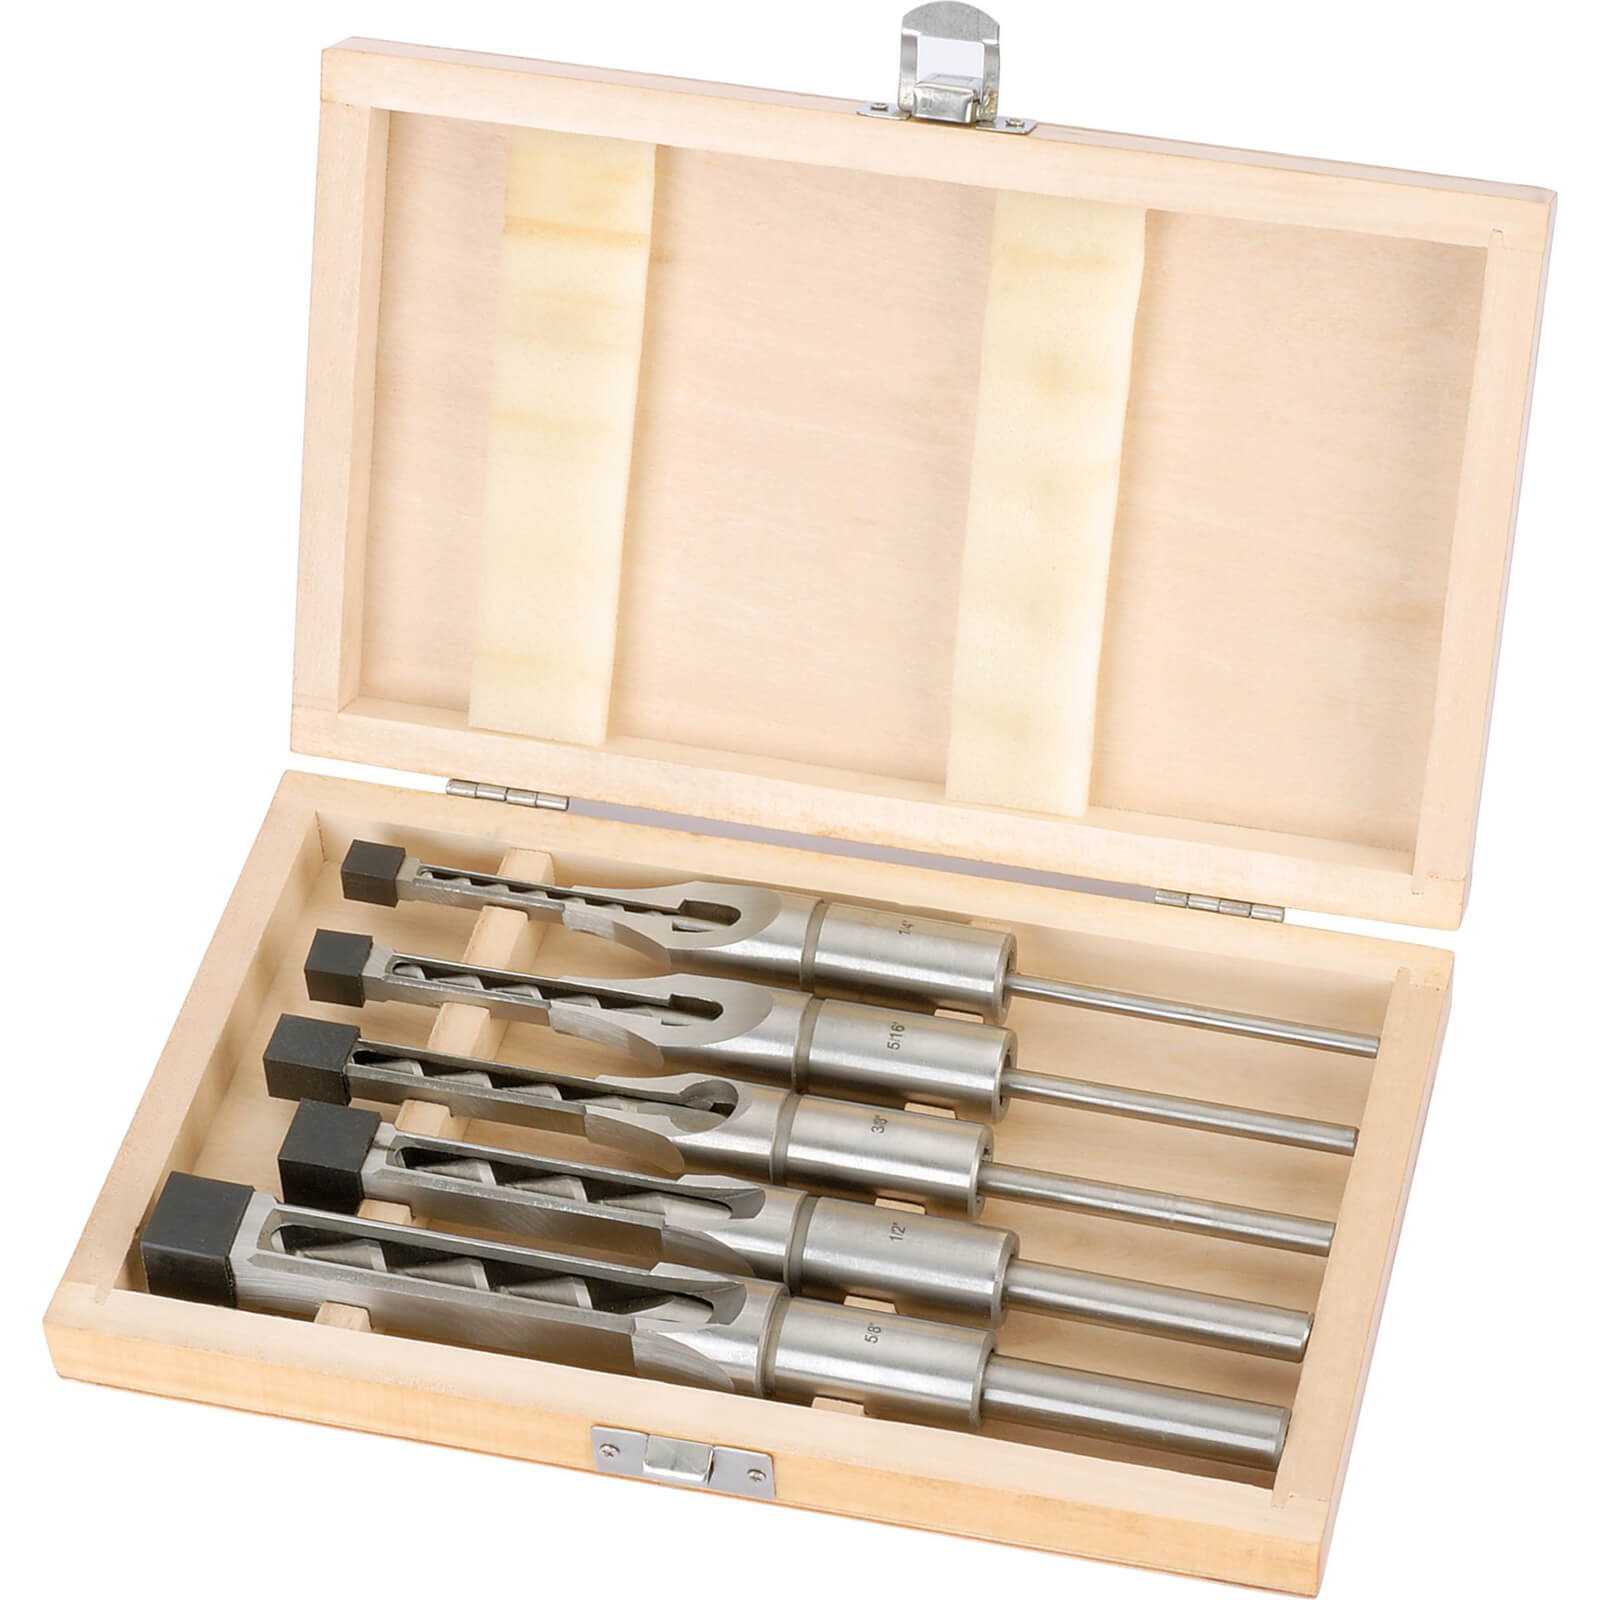 Photo of Draper 5 Piece Hollow Square Mortice Chisel And Bit Set